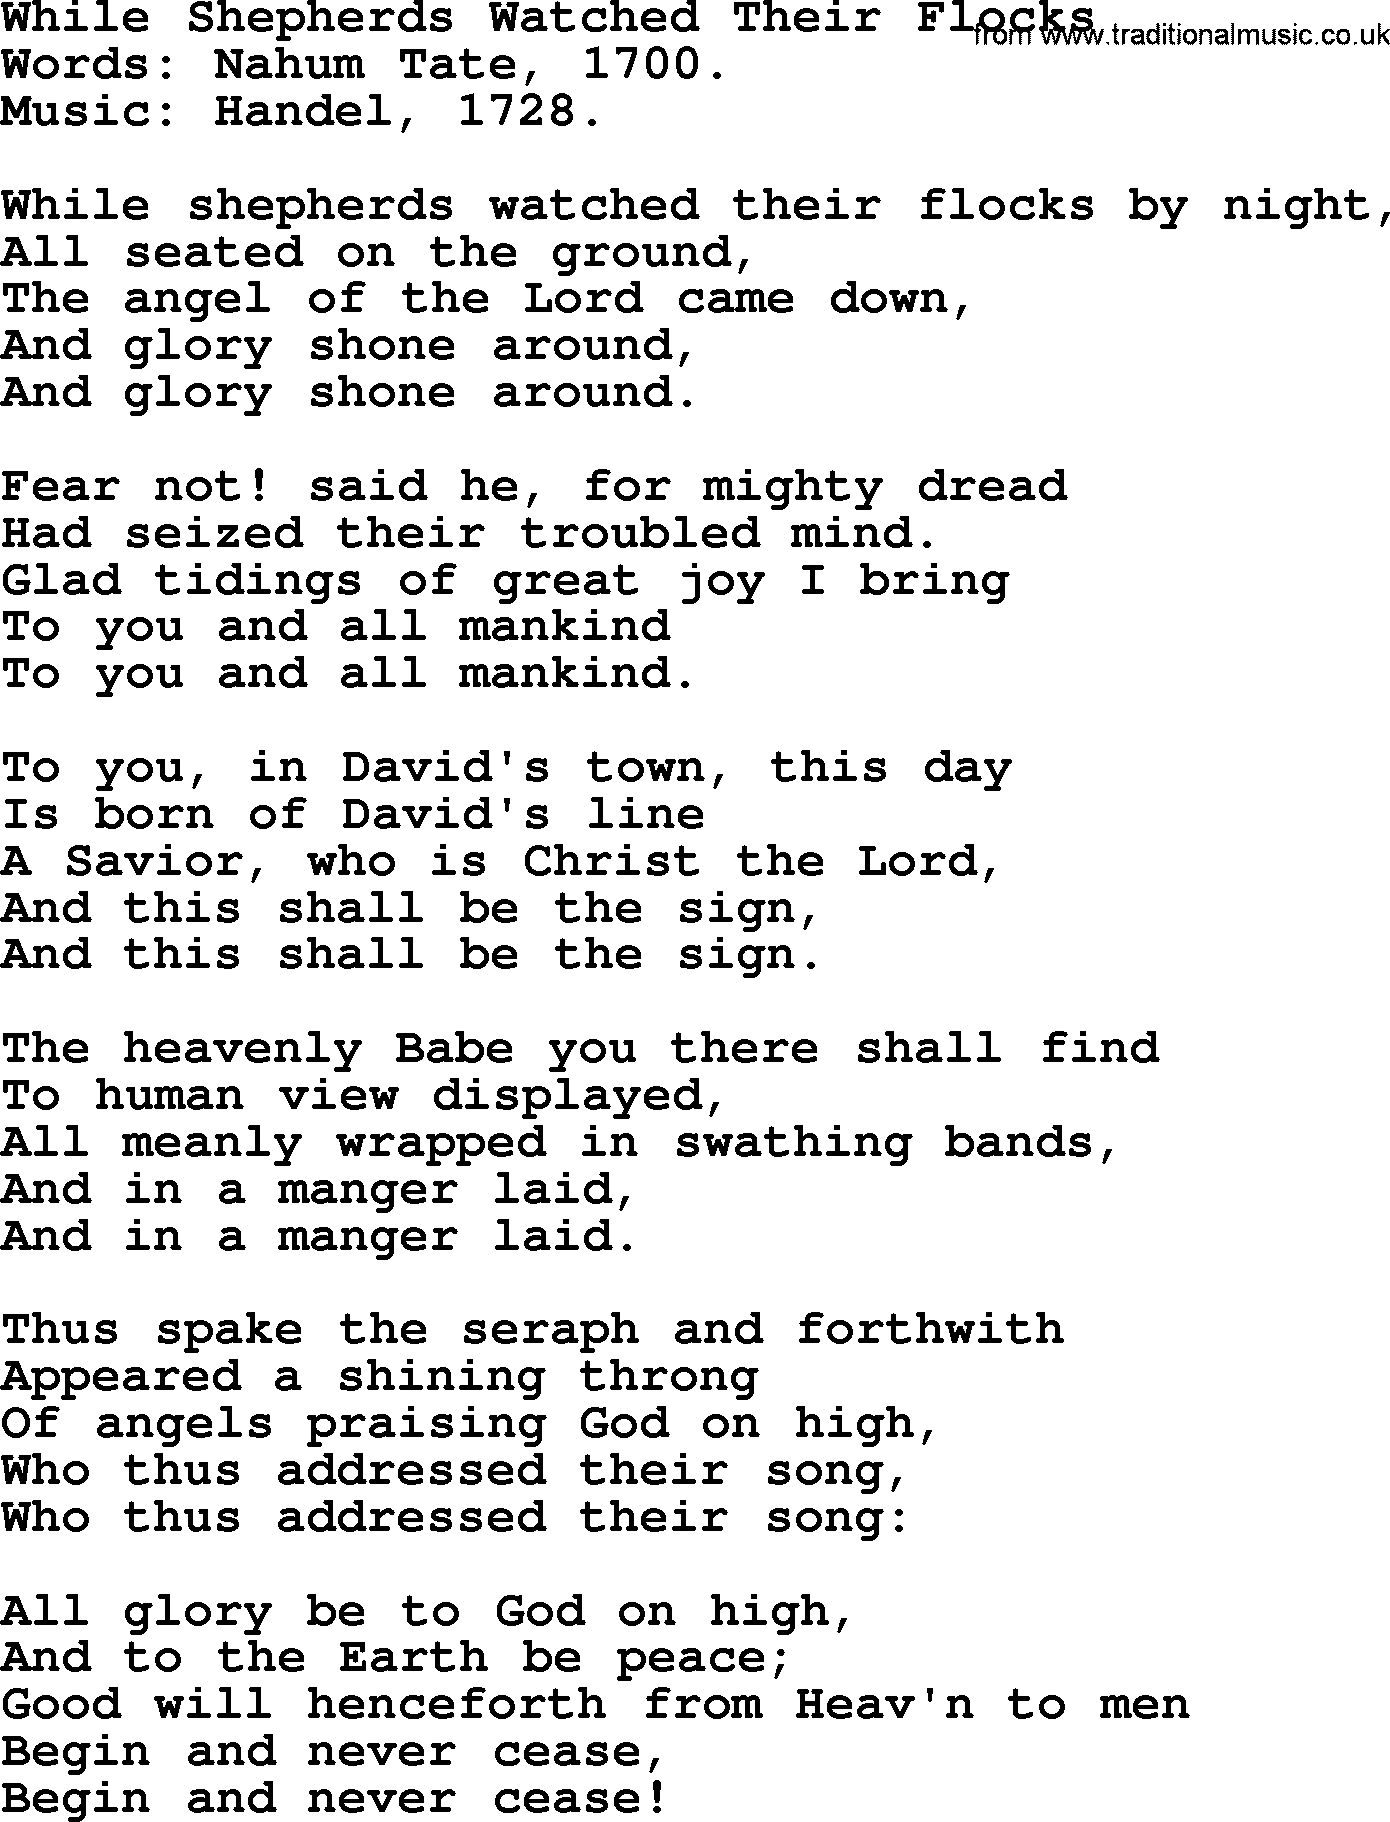 Christmas Hymns, Carols and Songs, title: While Shepherds Watched Their Flocks, lyrics with PDF